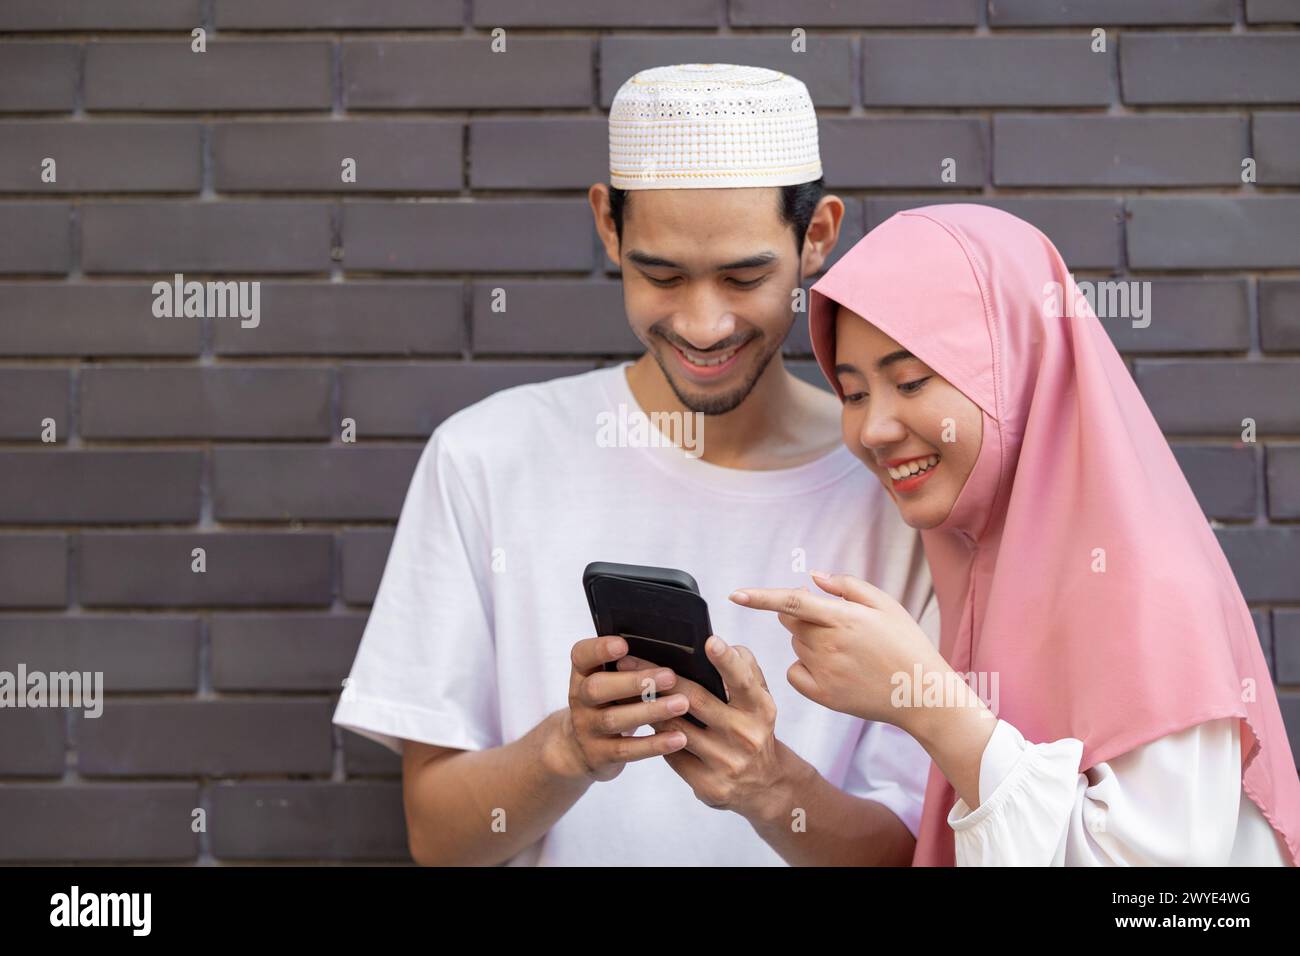 muslim people teen happy play smartphone relax enjoy together. islamic using cell phone outdoors Stock Photo